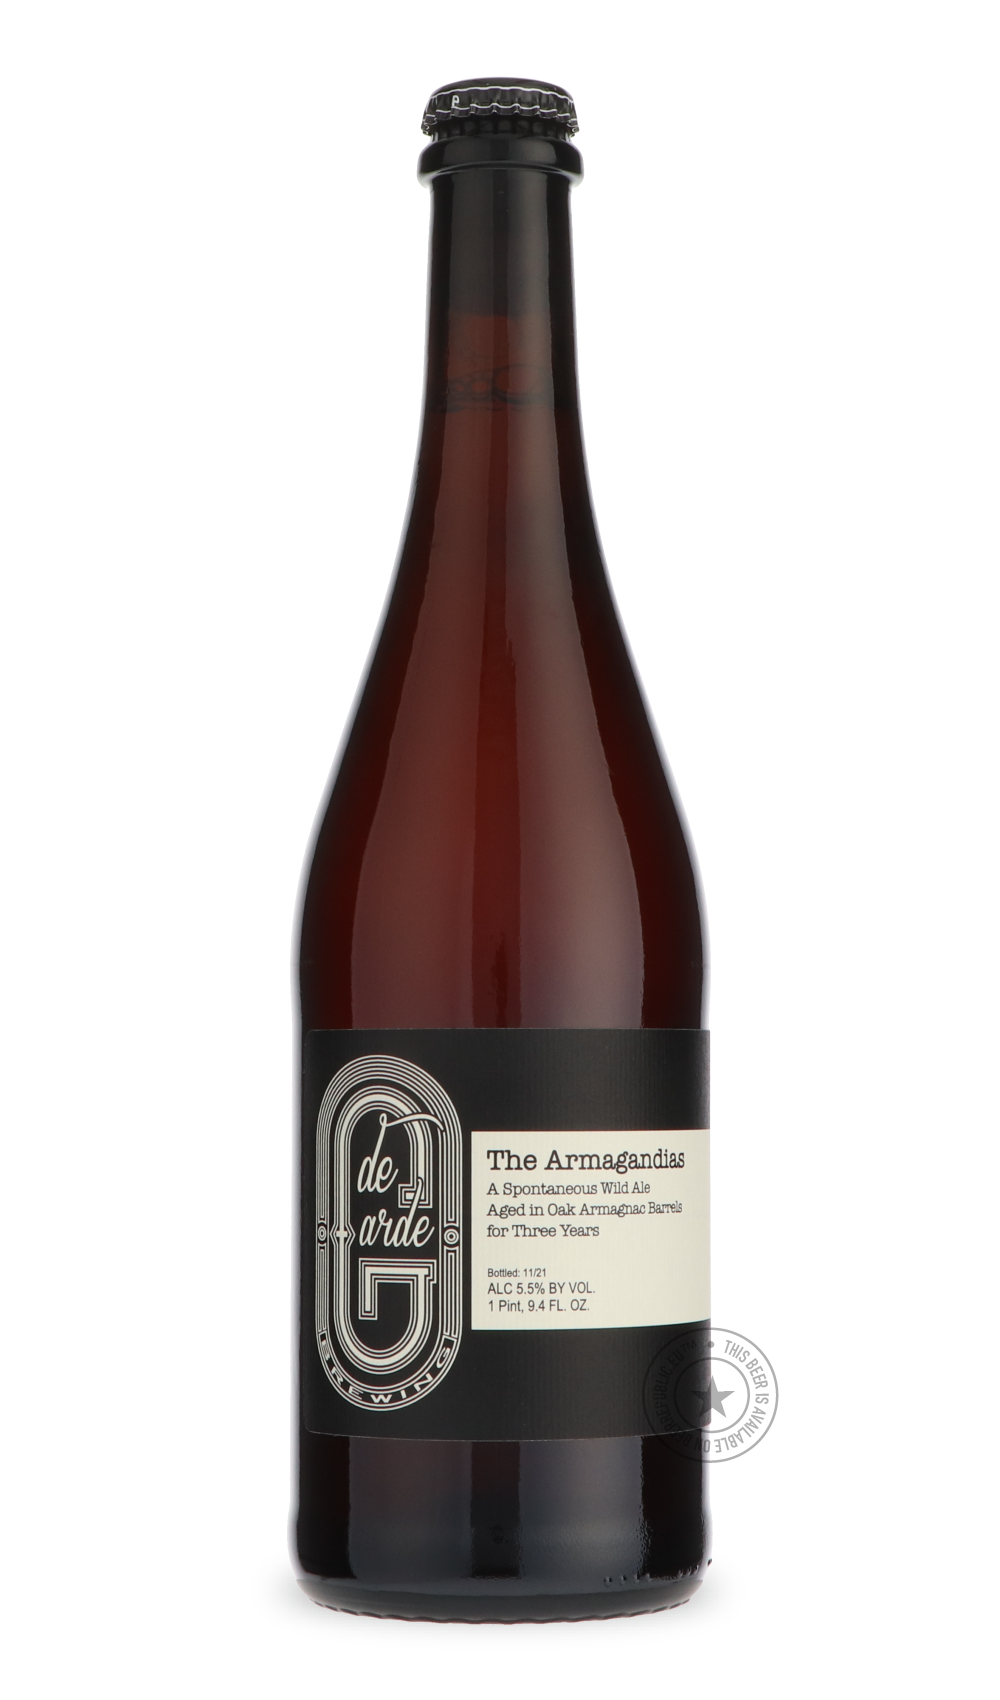 -De Garde- The Armagandias-Sour / Wild & Fruity- Only @ Beer Republic - The best online beer store for American & Canadian craft beer - Buy beer online from the USA and Canada - Bier online kopen - Amerikaans bier kopen - Craft beer store - Craft beer kopen - Amerikanisch bier kaufen - Bier online kaufen - Acheter biere online - IPA - Stout - Porter - New England IPA - Hazy IPA - Imperial Stout - Barrel Aged - Barrel Aged Imperial Stout - Brown - Dark beer - Blond - Blonde - Pilsner - Lager - Wheat - Weizen